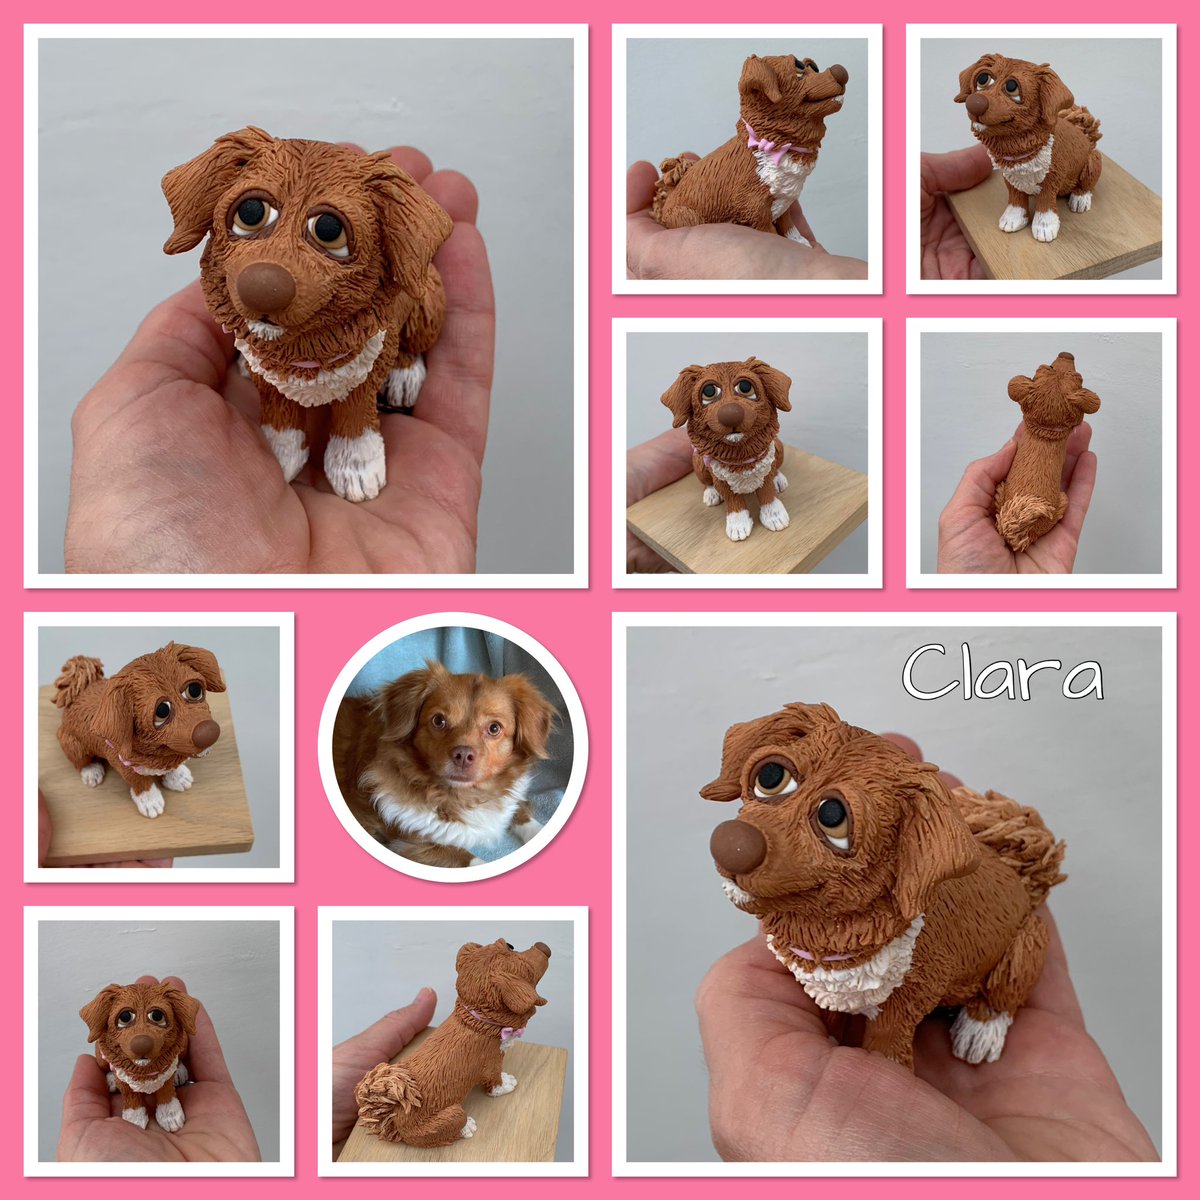 Sweet Clara 😍 a little Romanian rescue pup, custom made gift for her pawrents 🐾 my order book is currently open please DM for info 🙂 #petportraits #rescuedog #polymerclay #handmade #shopindie #MHHSBD